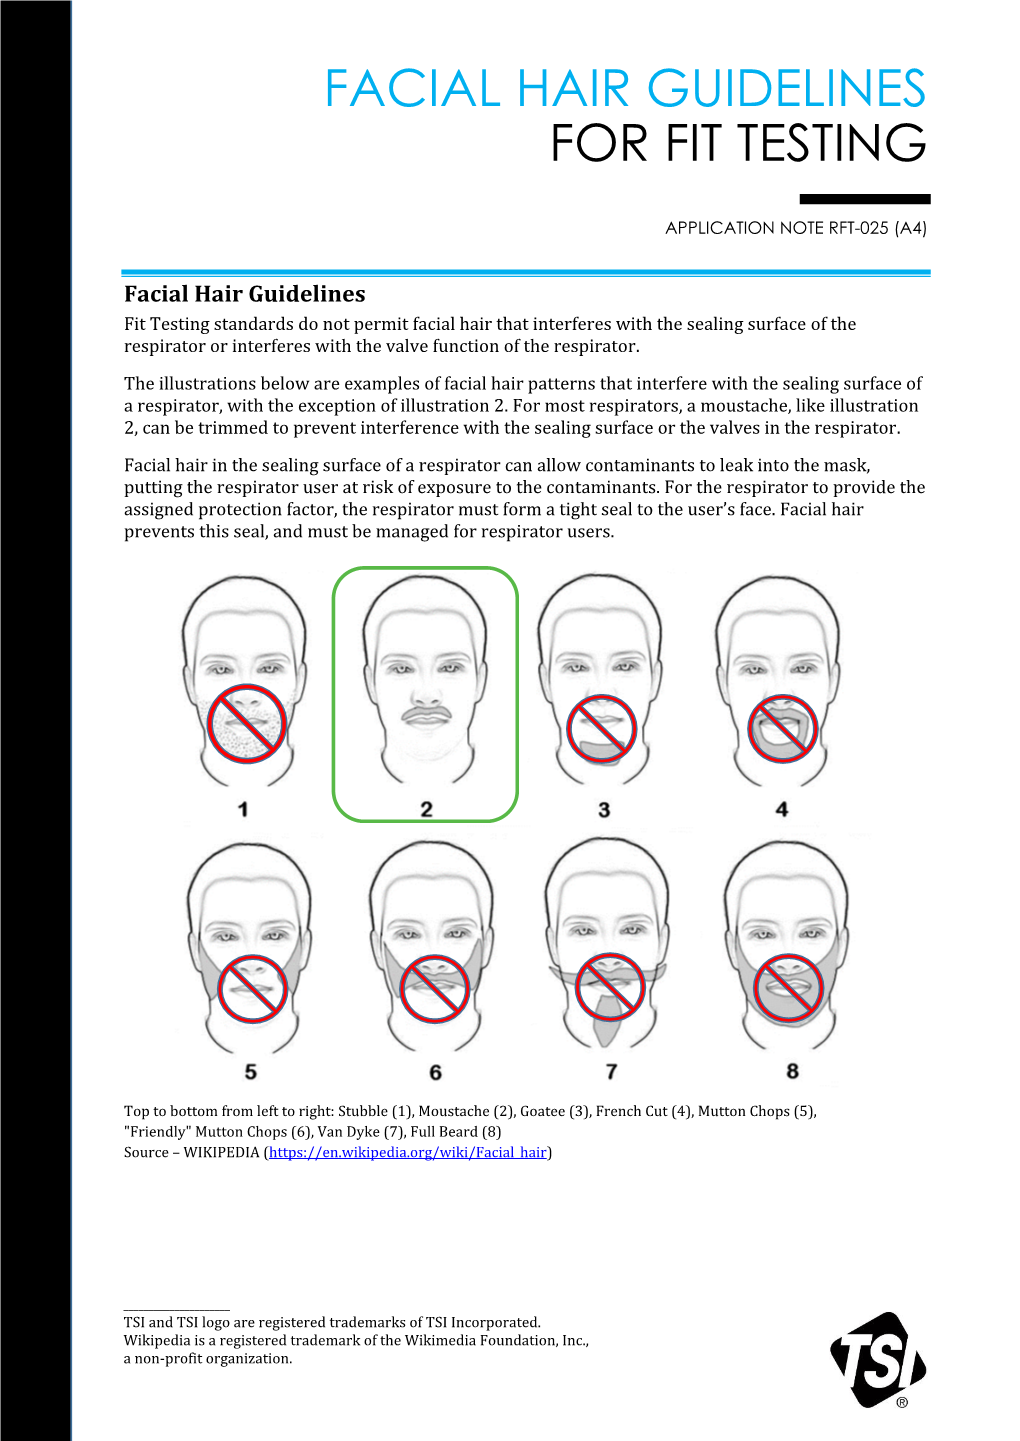 Facial Hair Guidelines for Fit Testing App Note (RFT-025)